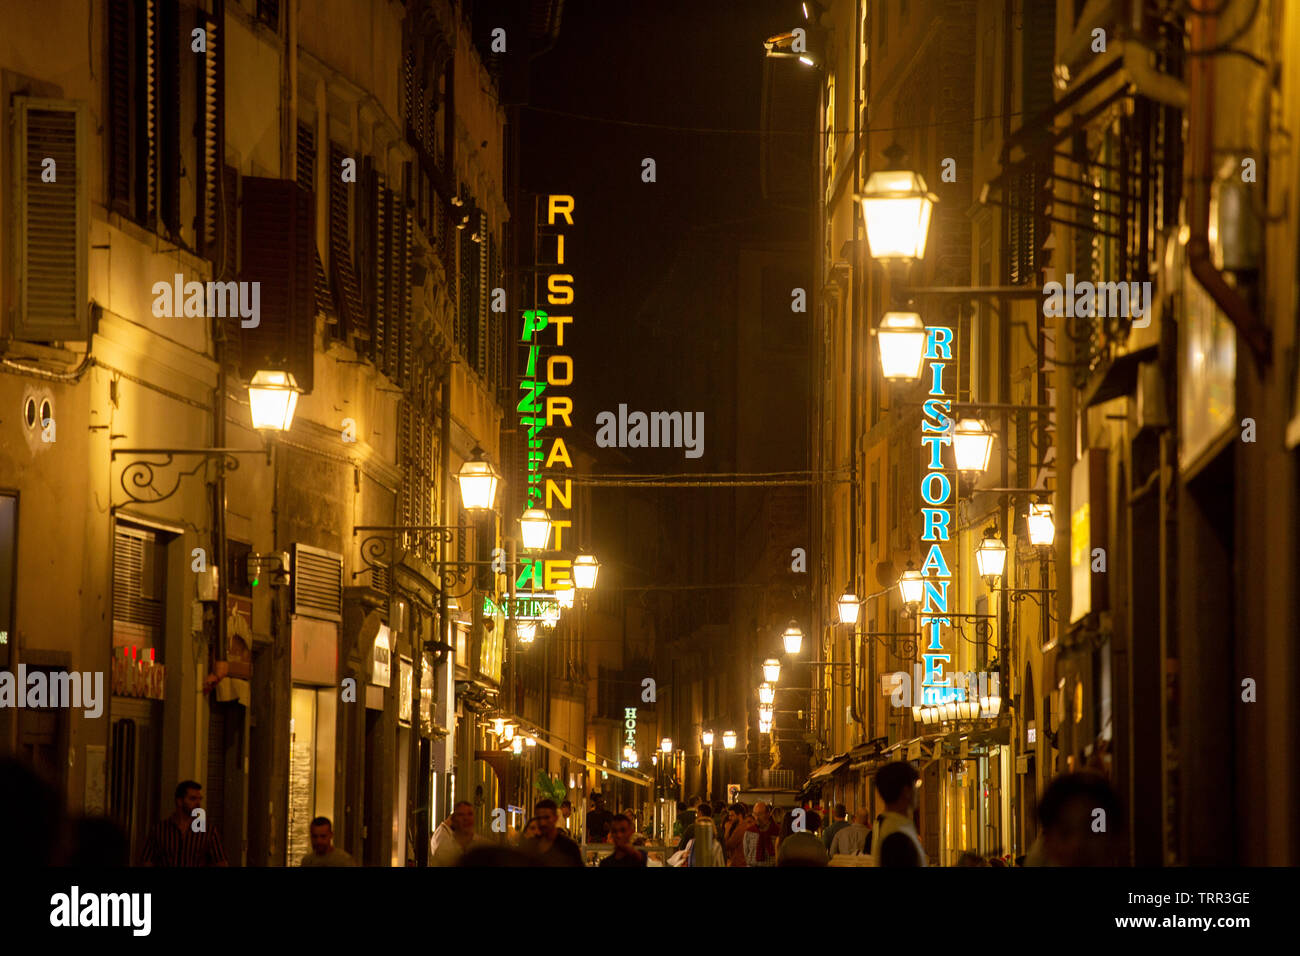 Illuminated restaurant signs in a street in Florence, Italy, at night. Stock Photo